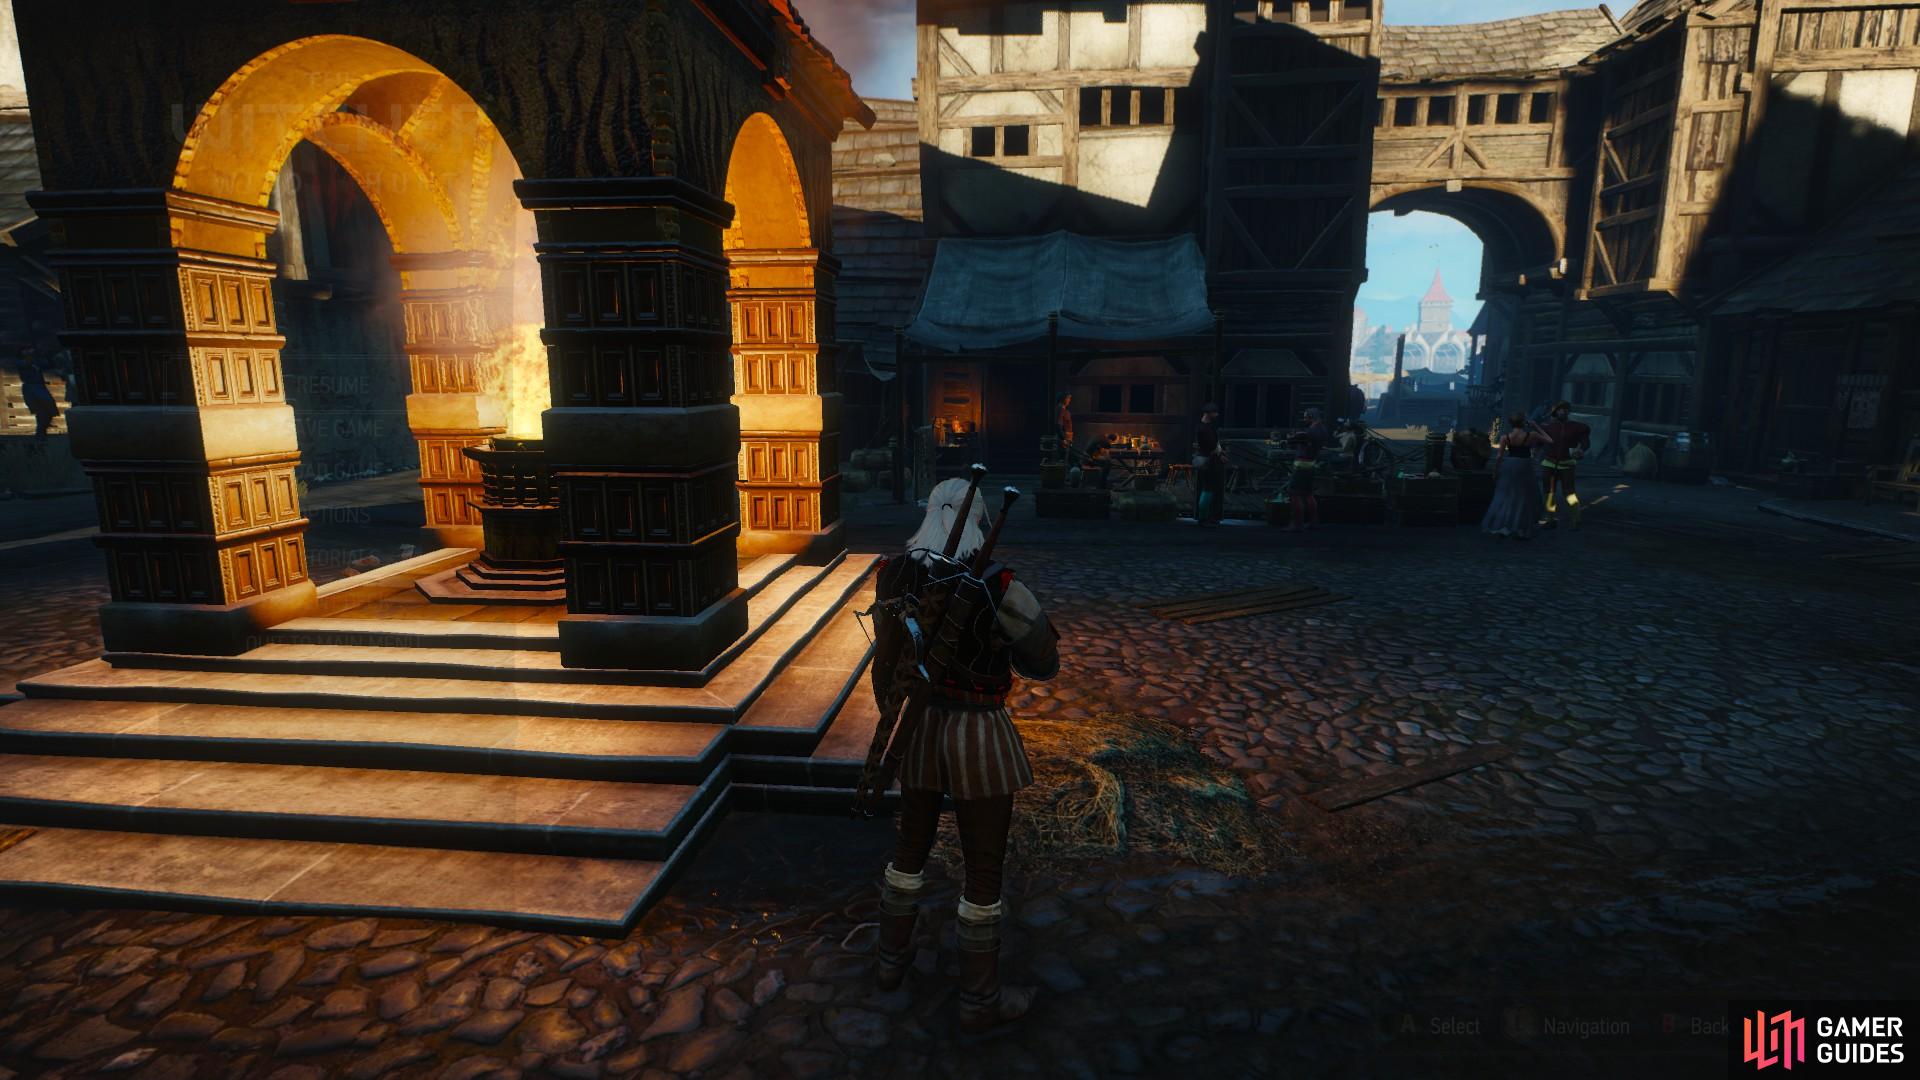 Here is everything you need to know about the Witcher 3's Of Sword and Dumpling Quest.